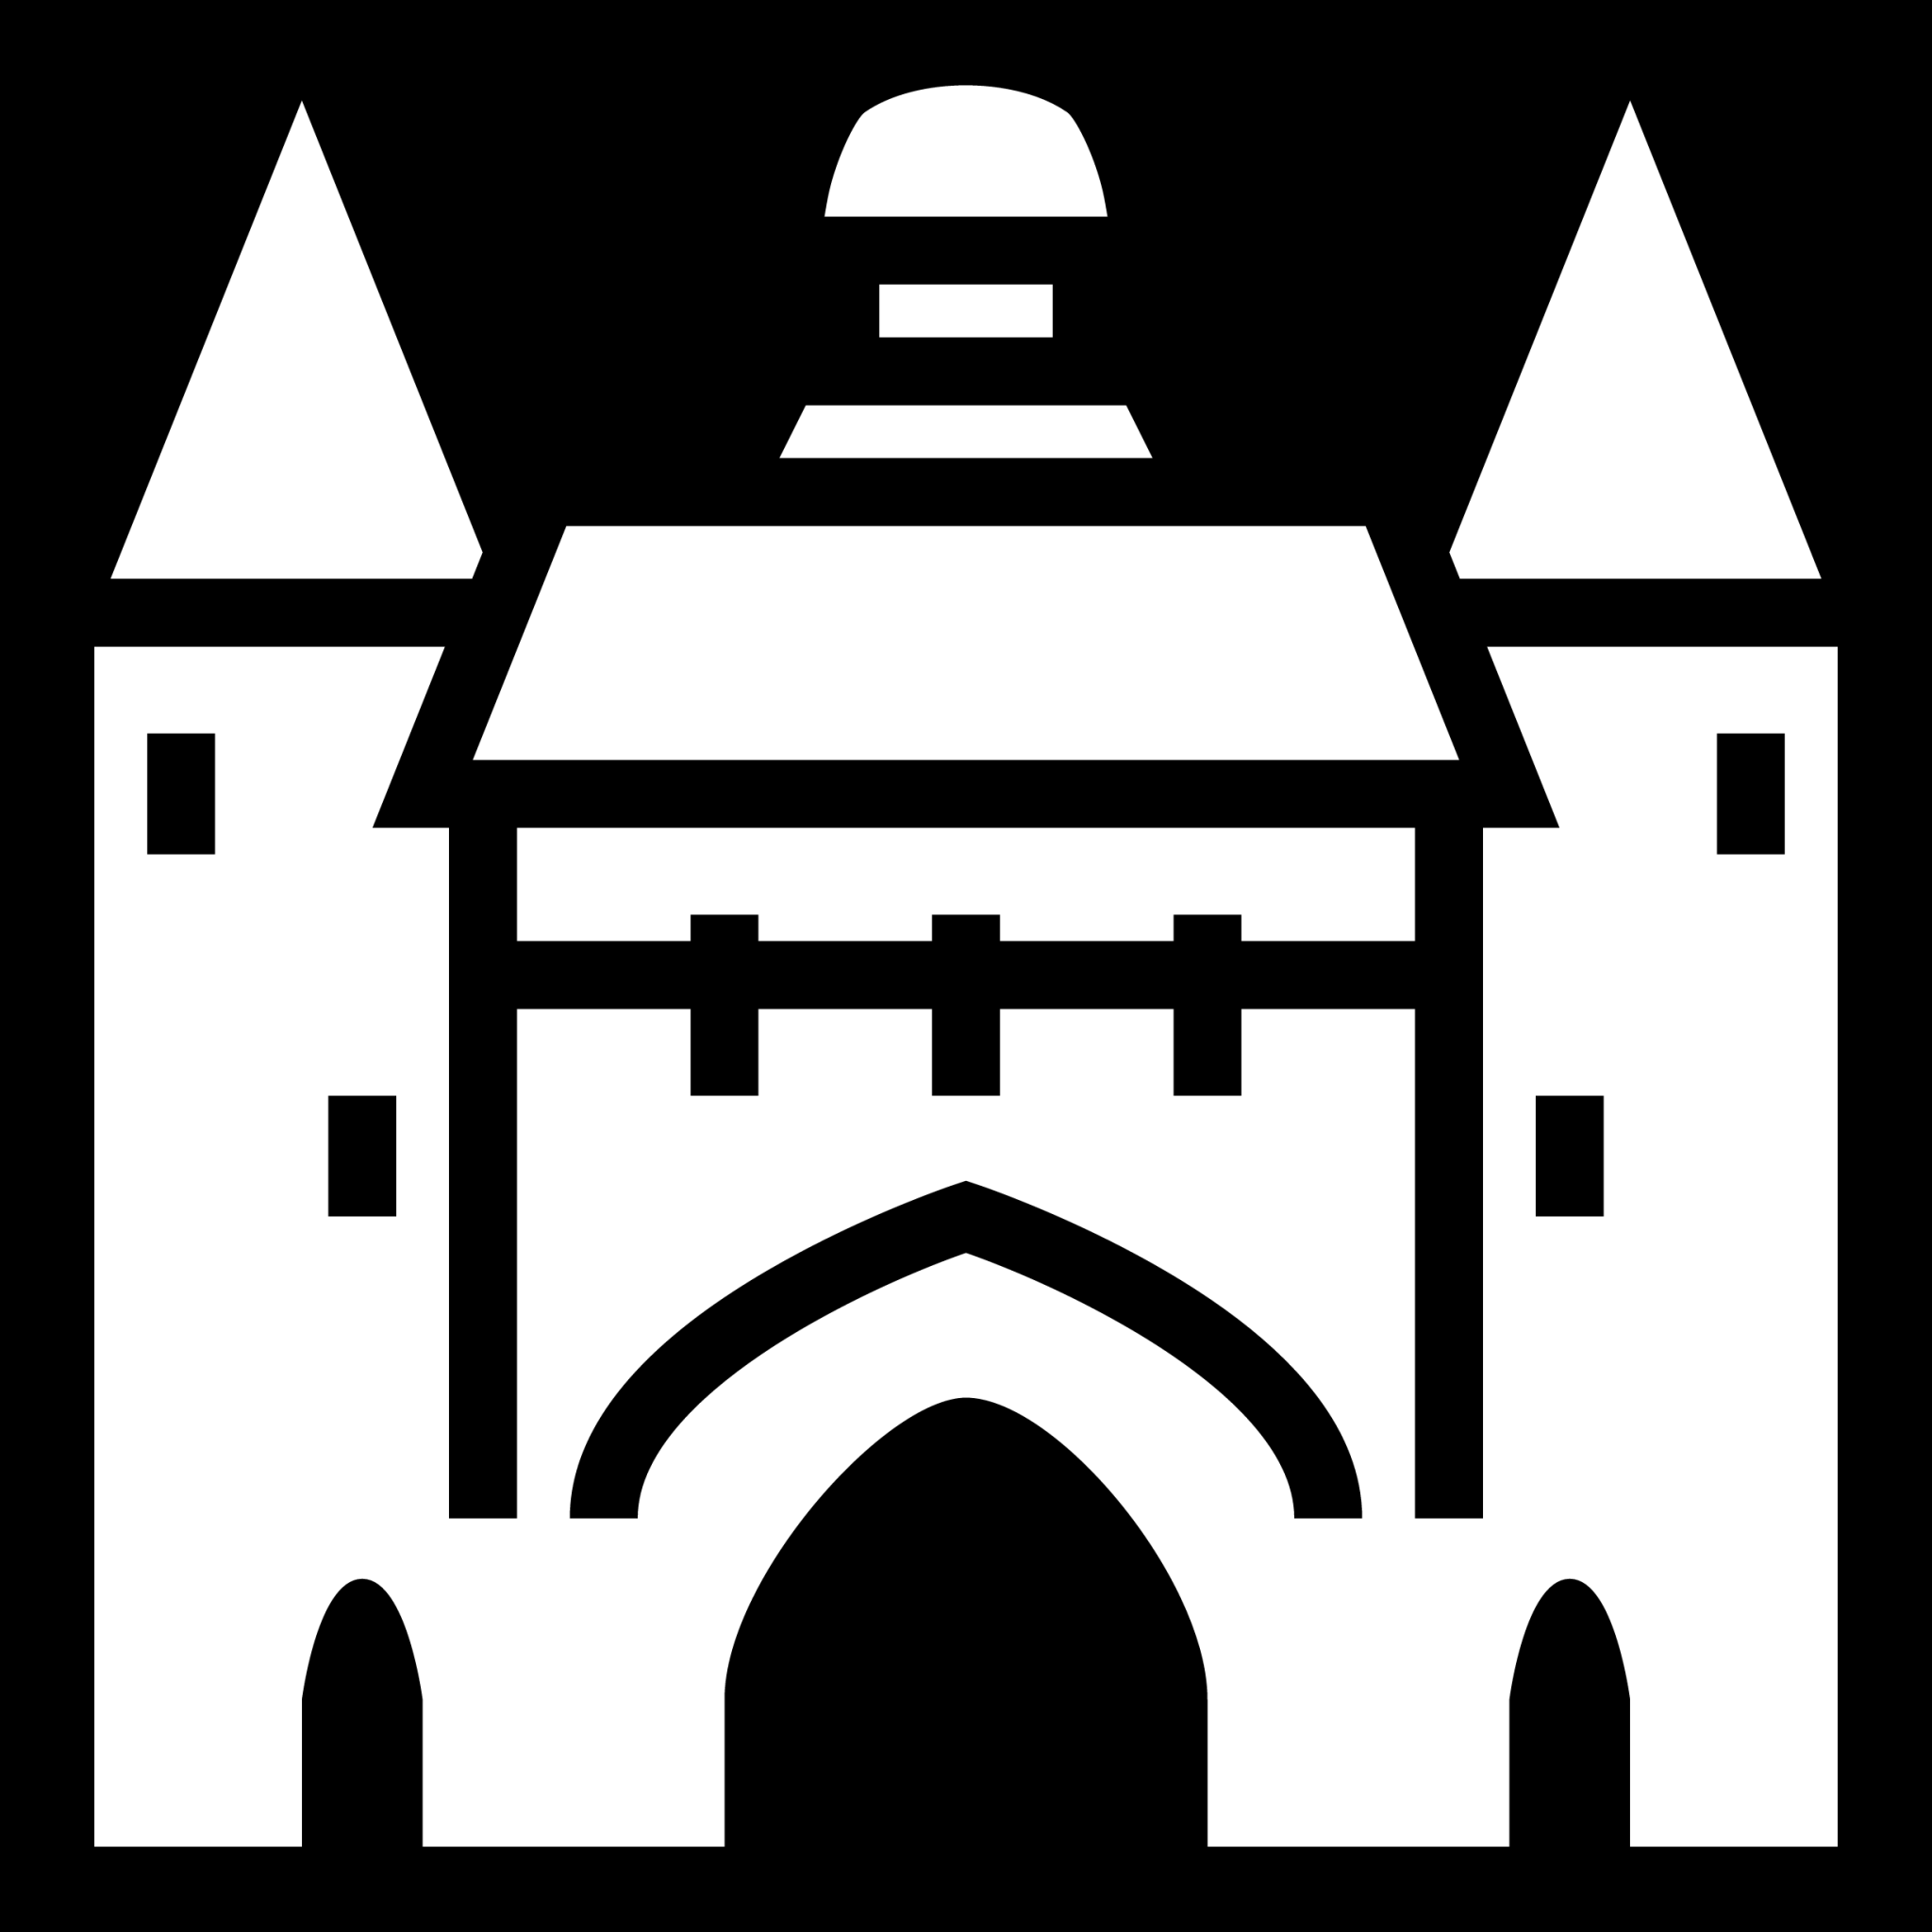 medieval gate icon